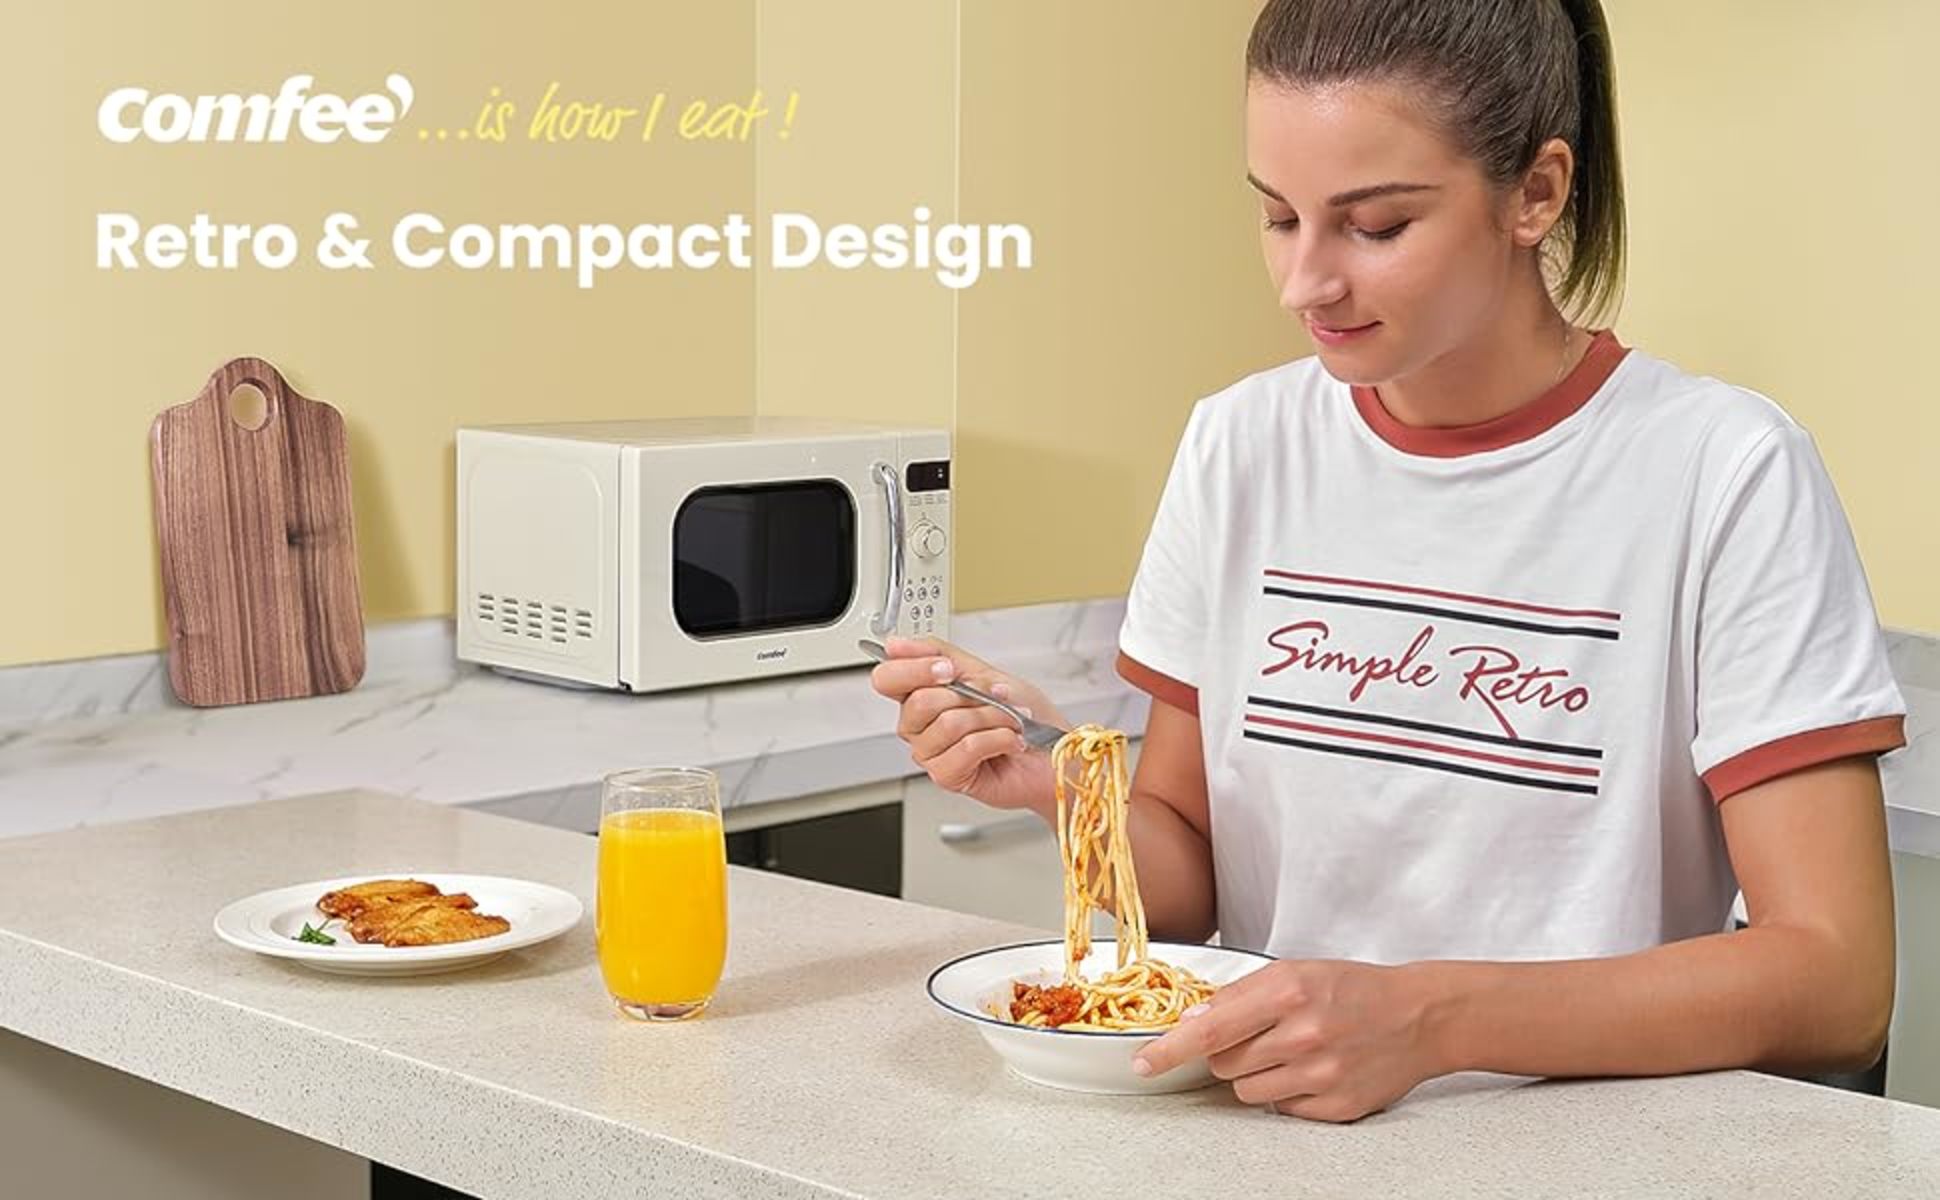 COMFEE' Retro Small Microwave Oven W Compact Size 9 Preset Menus,  Position-Memory Turntable Mute Function, Countertop Microwave Perfect For Small  Spaces 0.7 Cu Ft/700W Cream AM720C2RA-A Retro Apricot 